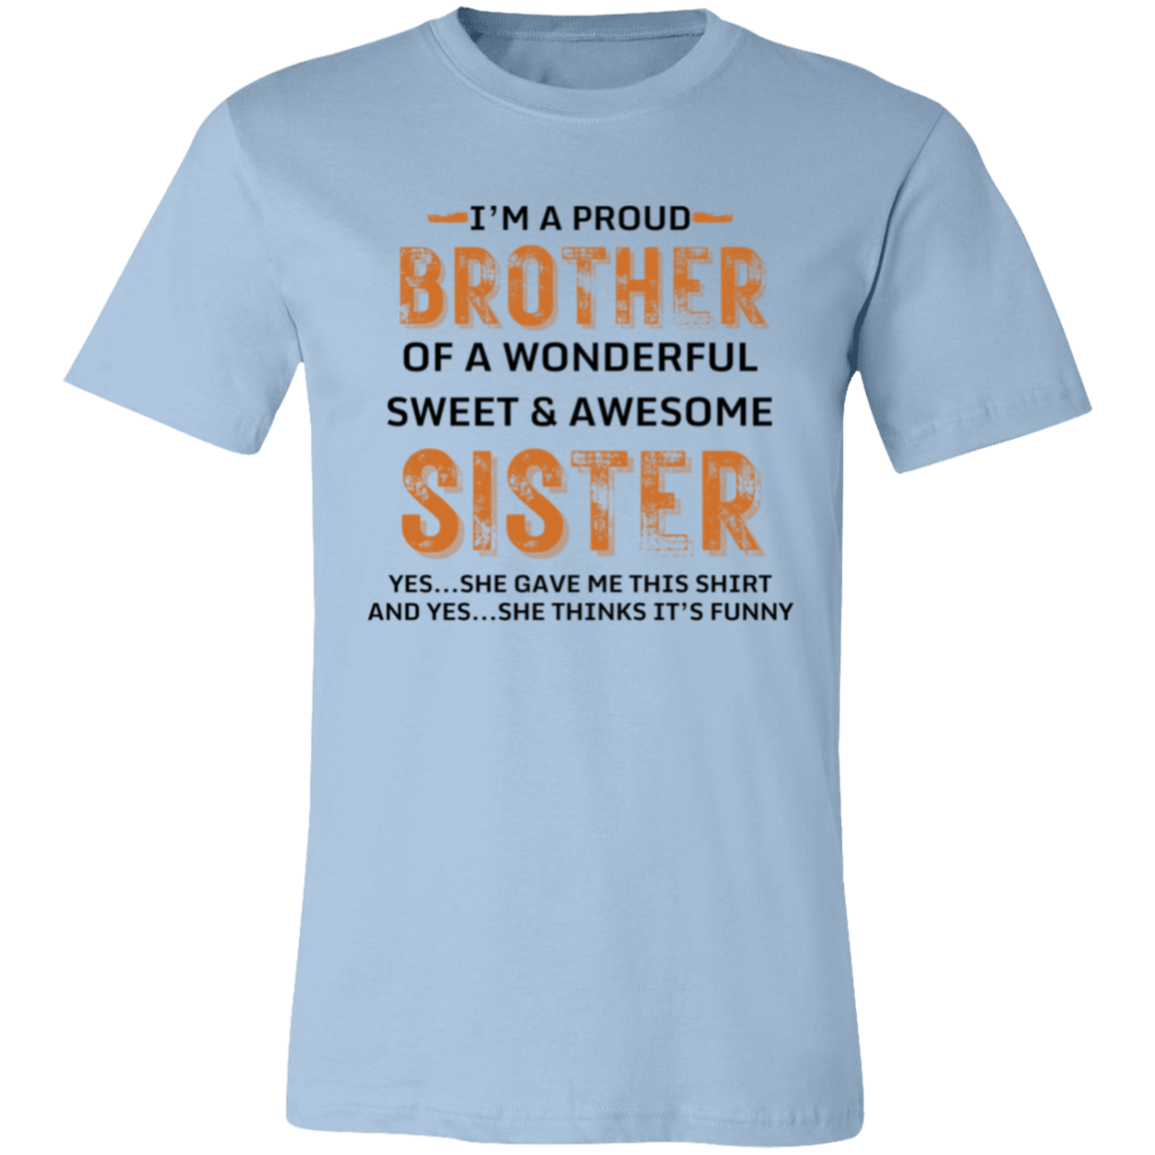 I'm A Proud Brother from Sister T-Shirt (Unisex)